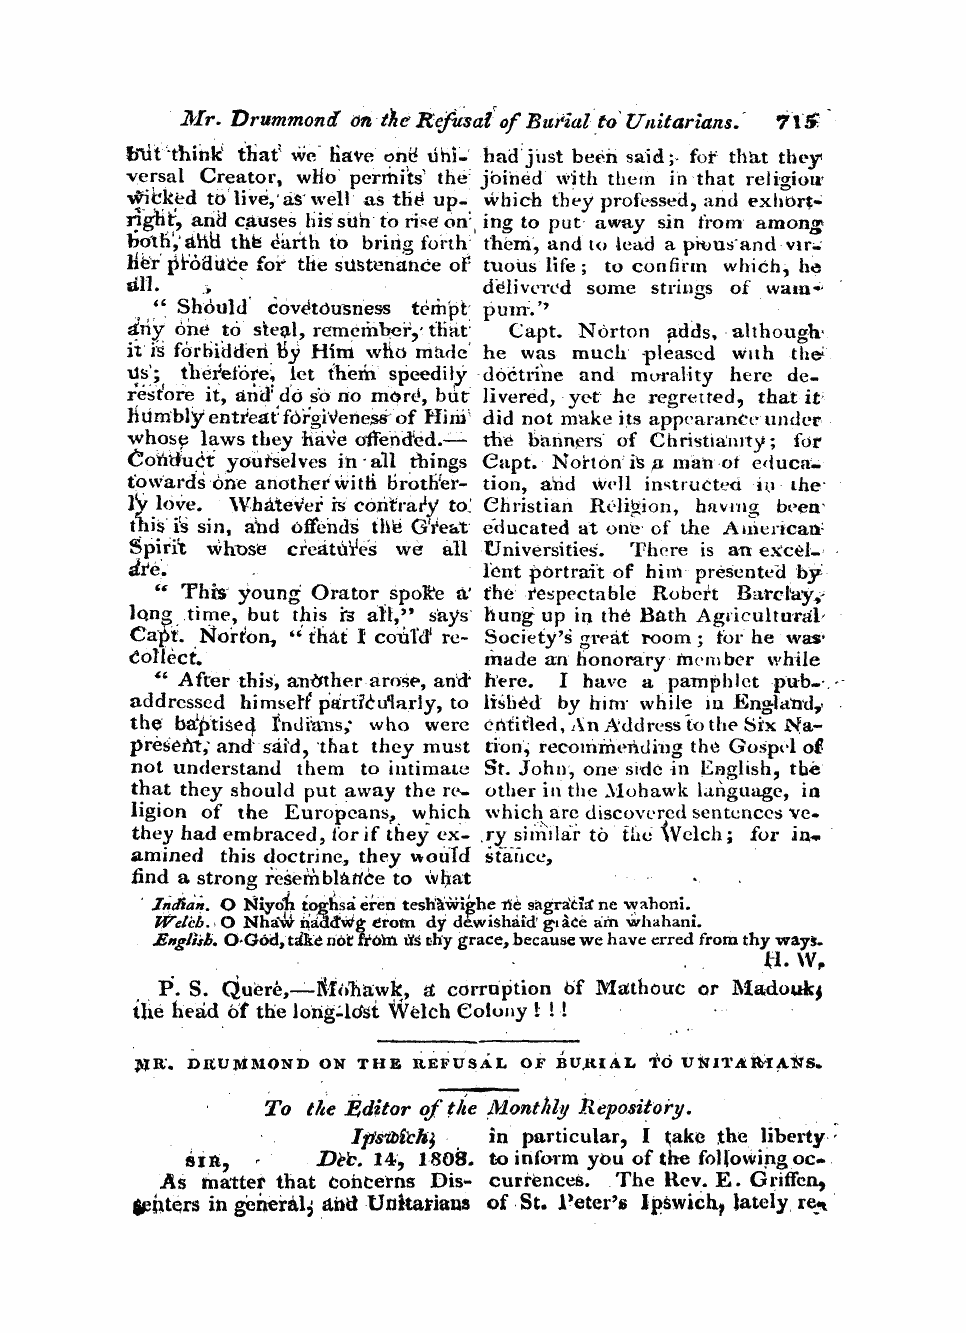 Monthly Repository (1806-1838) and Unitarian Chronicle (1832-1833): F Y, 1st edition, Supplement: 23